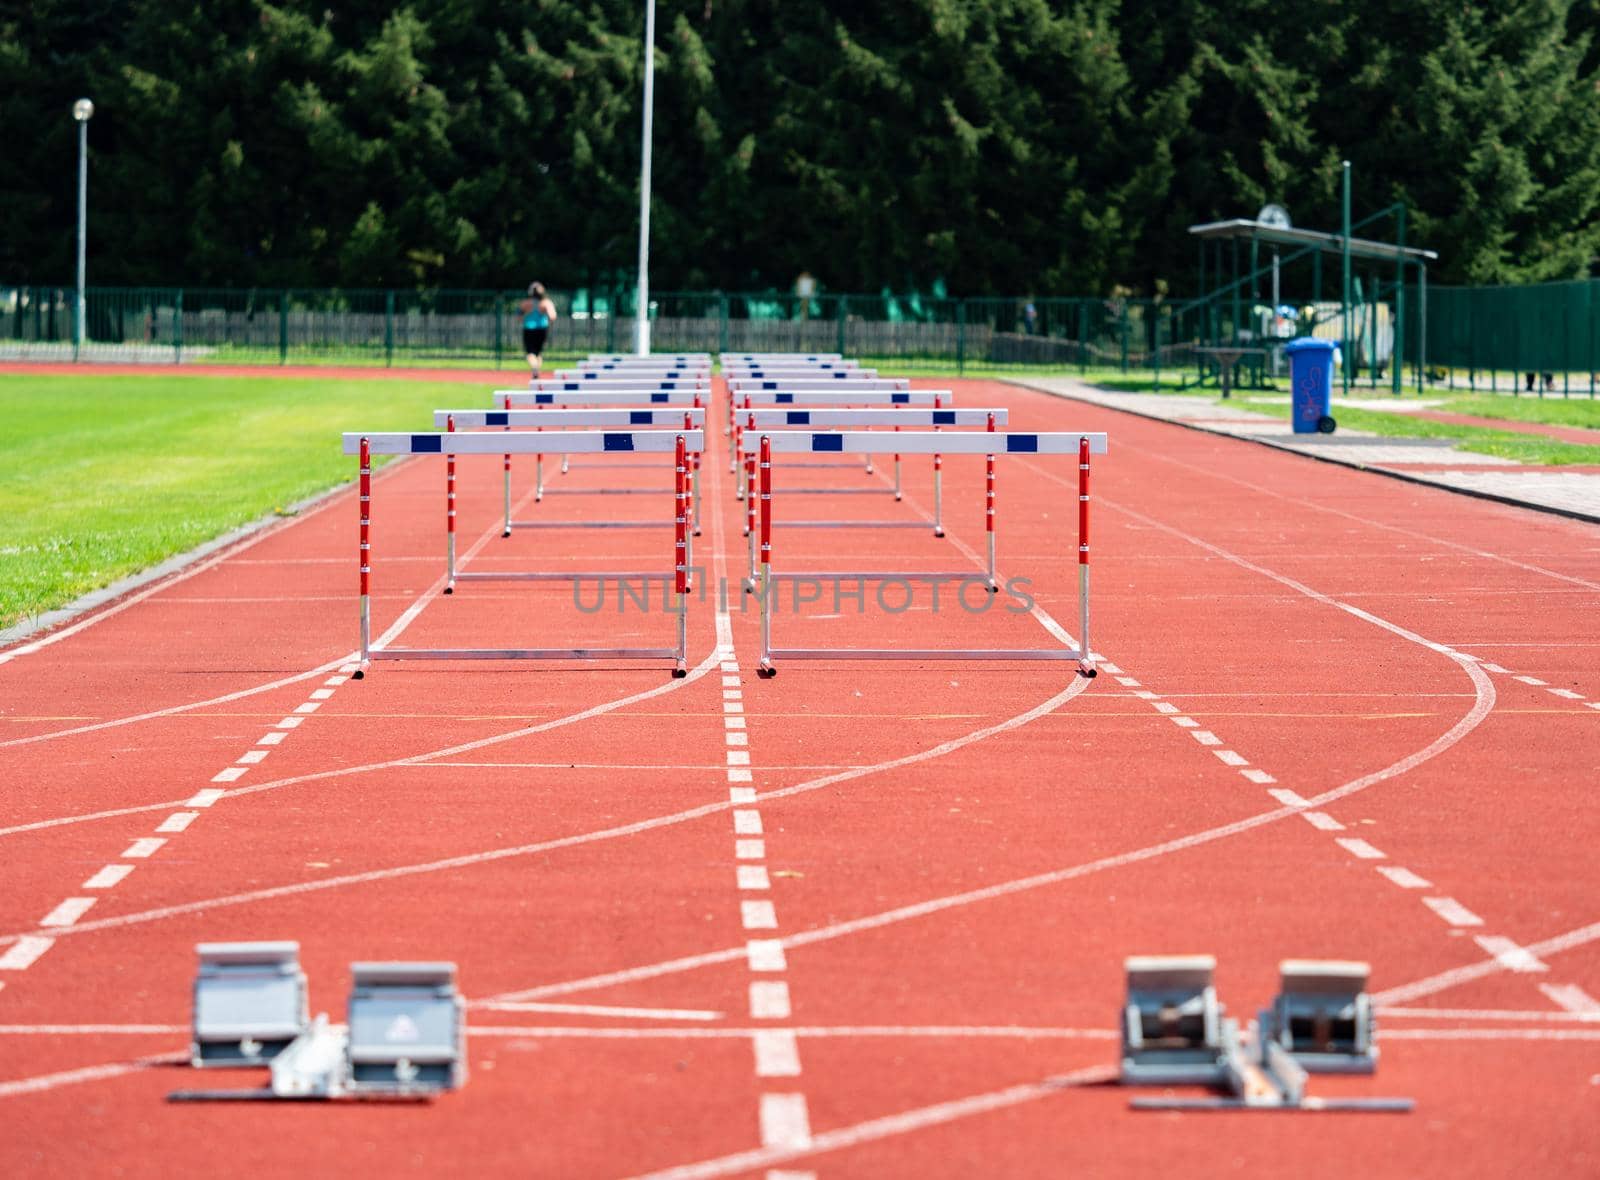 Hurdle on the sprint lane with starting blocks against blurry background. Stadium with two hurdles training tracks. 